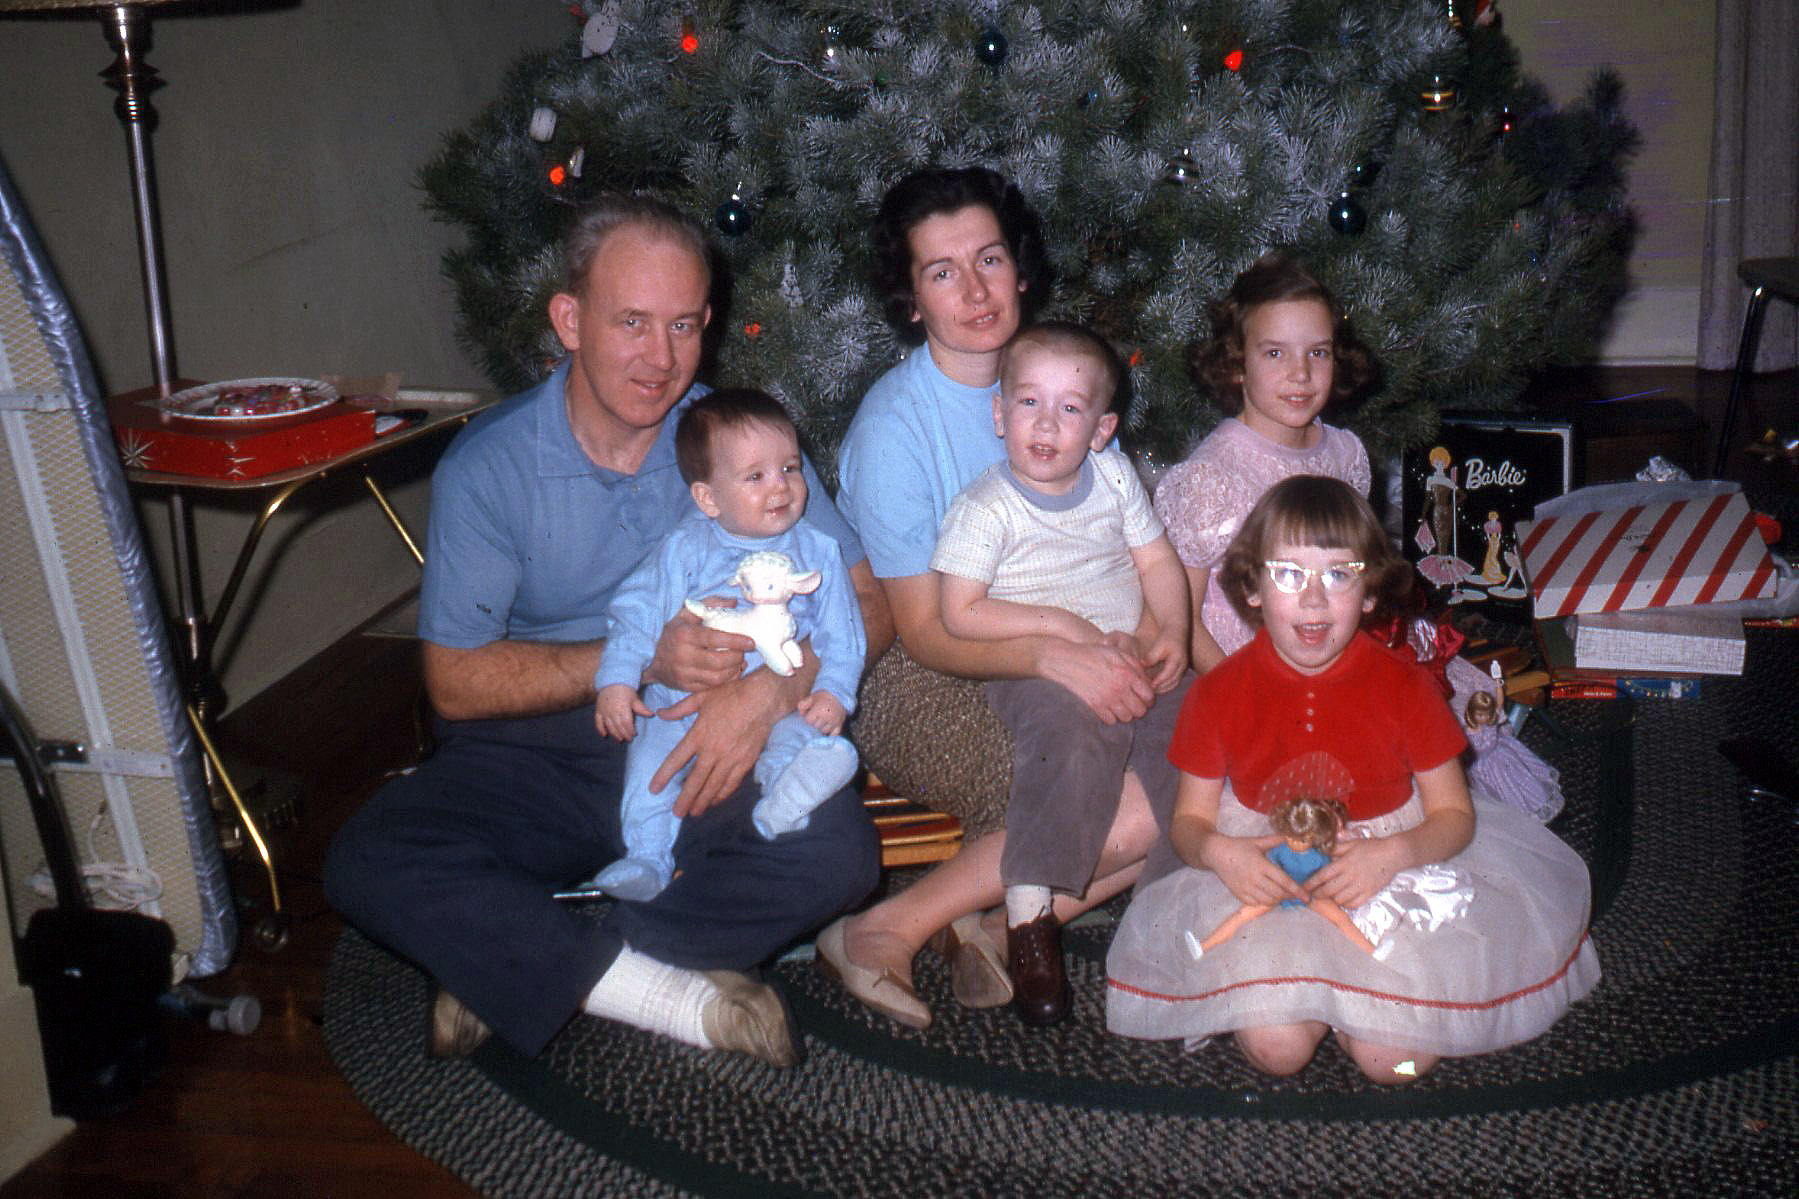 Christmas 1964 in Rochester, Indiana. Kodachrome slide. View full size. [It's Christmas in June (for me, especially) with an exceptional selection of member-submitted color slides. There are even more here. Thanks, Santa! - Dave]